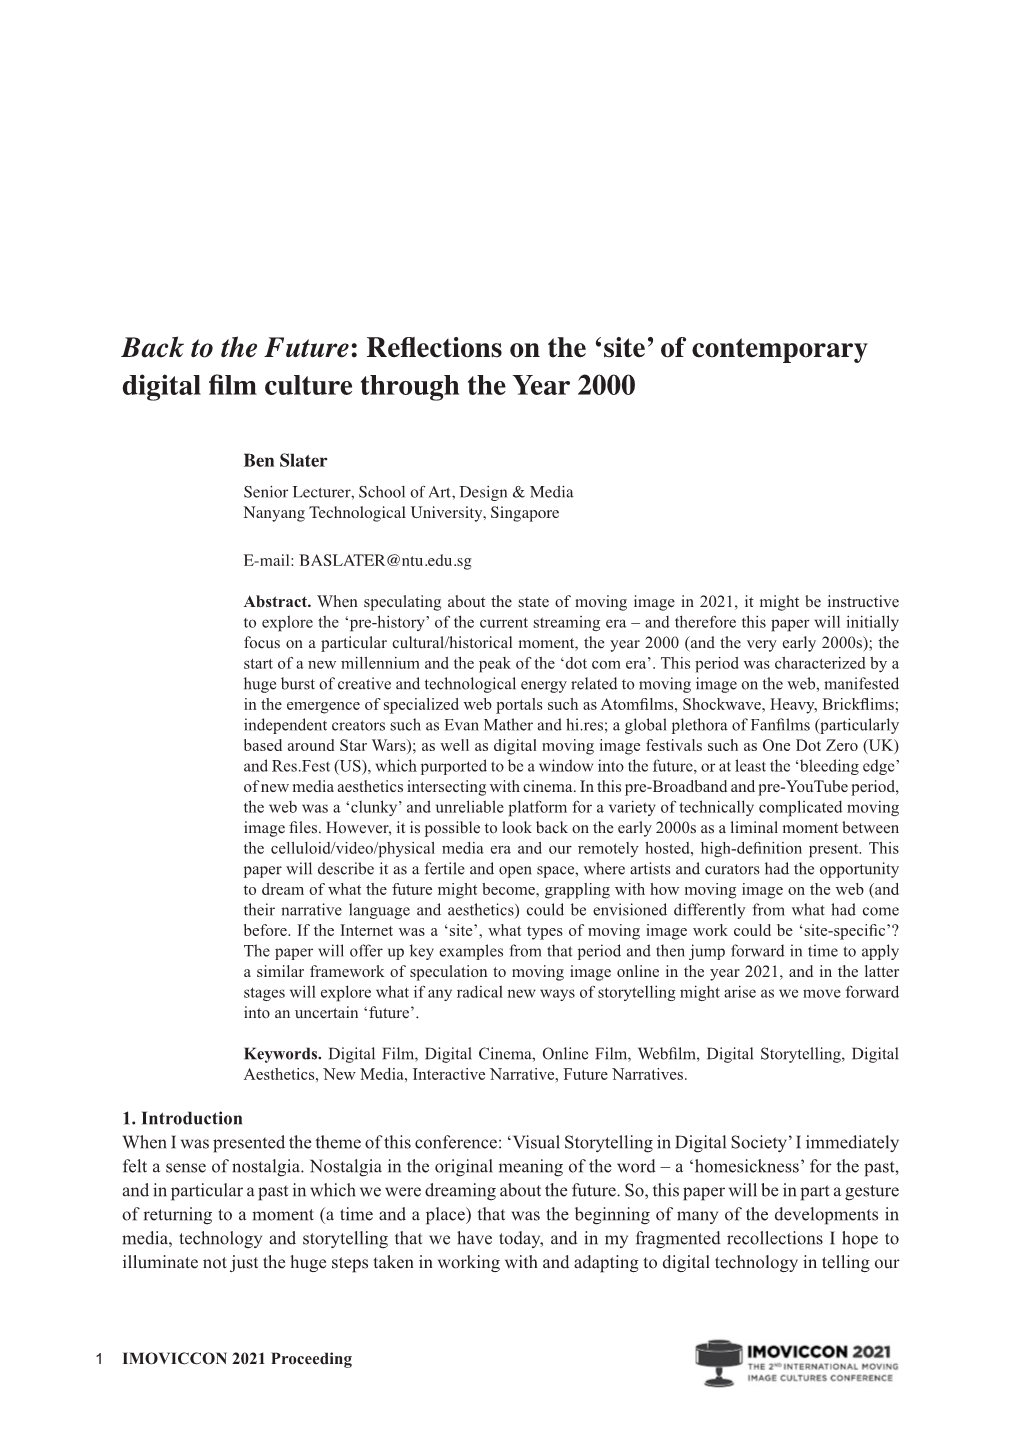 Of Contemporary Digital Film Culture Through the Year 2000